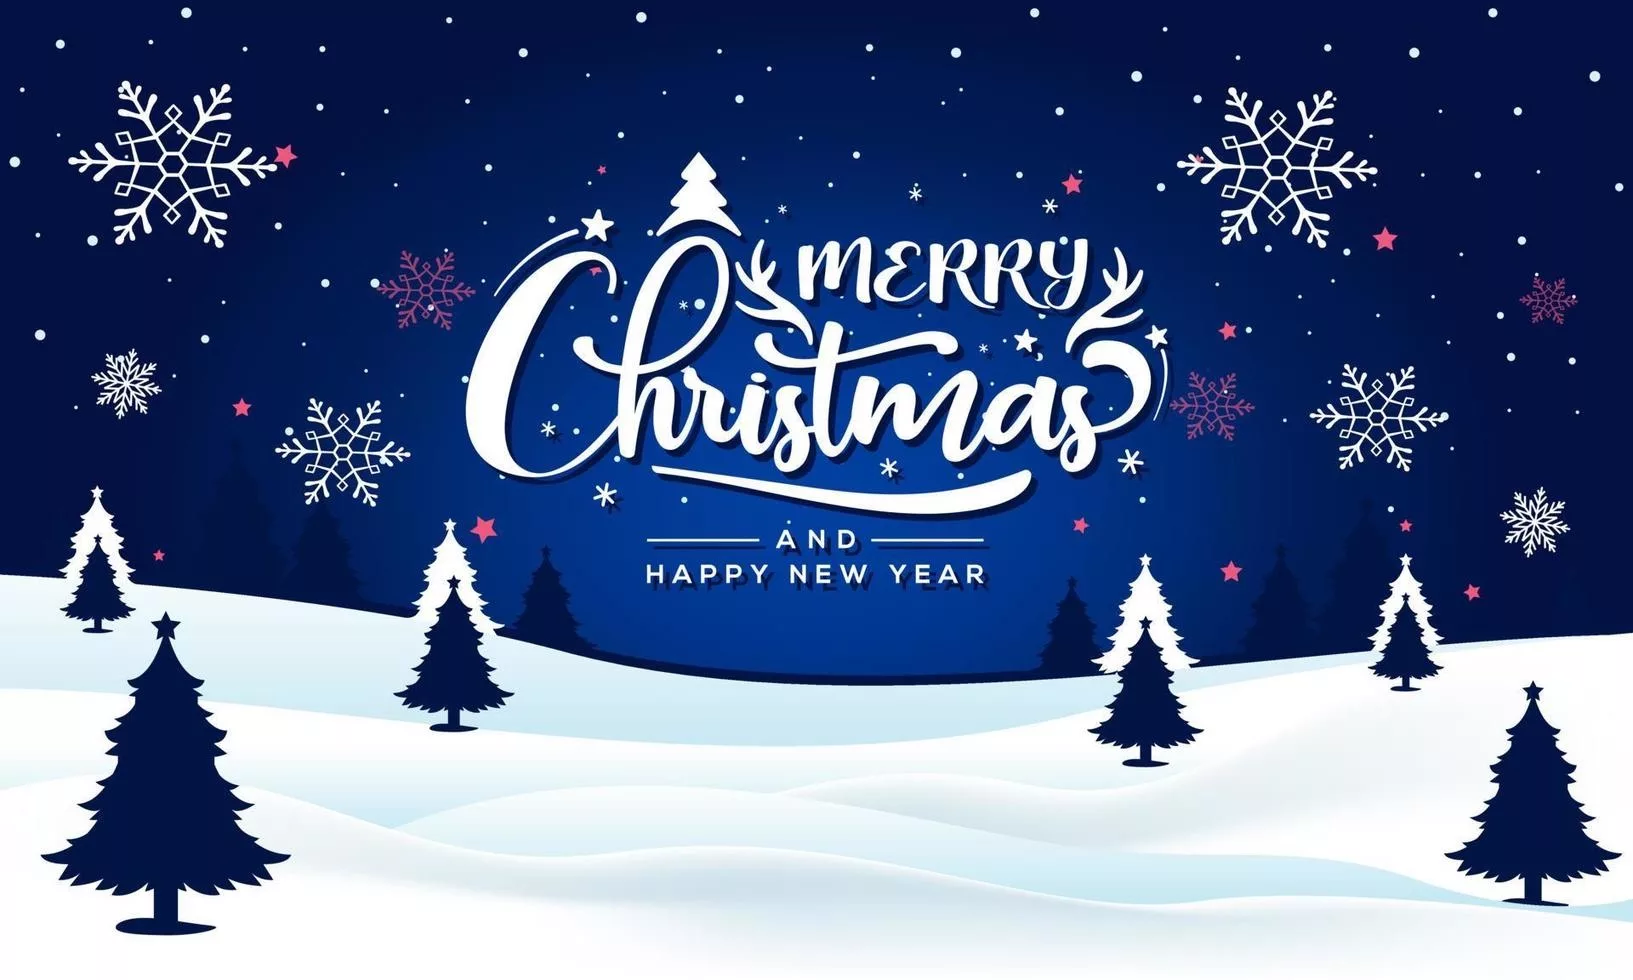 The words Merry Christmas on-shiny-xmas-background-with-winter-landscape-with-snowflakes-light-stars-